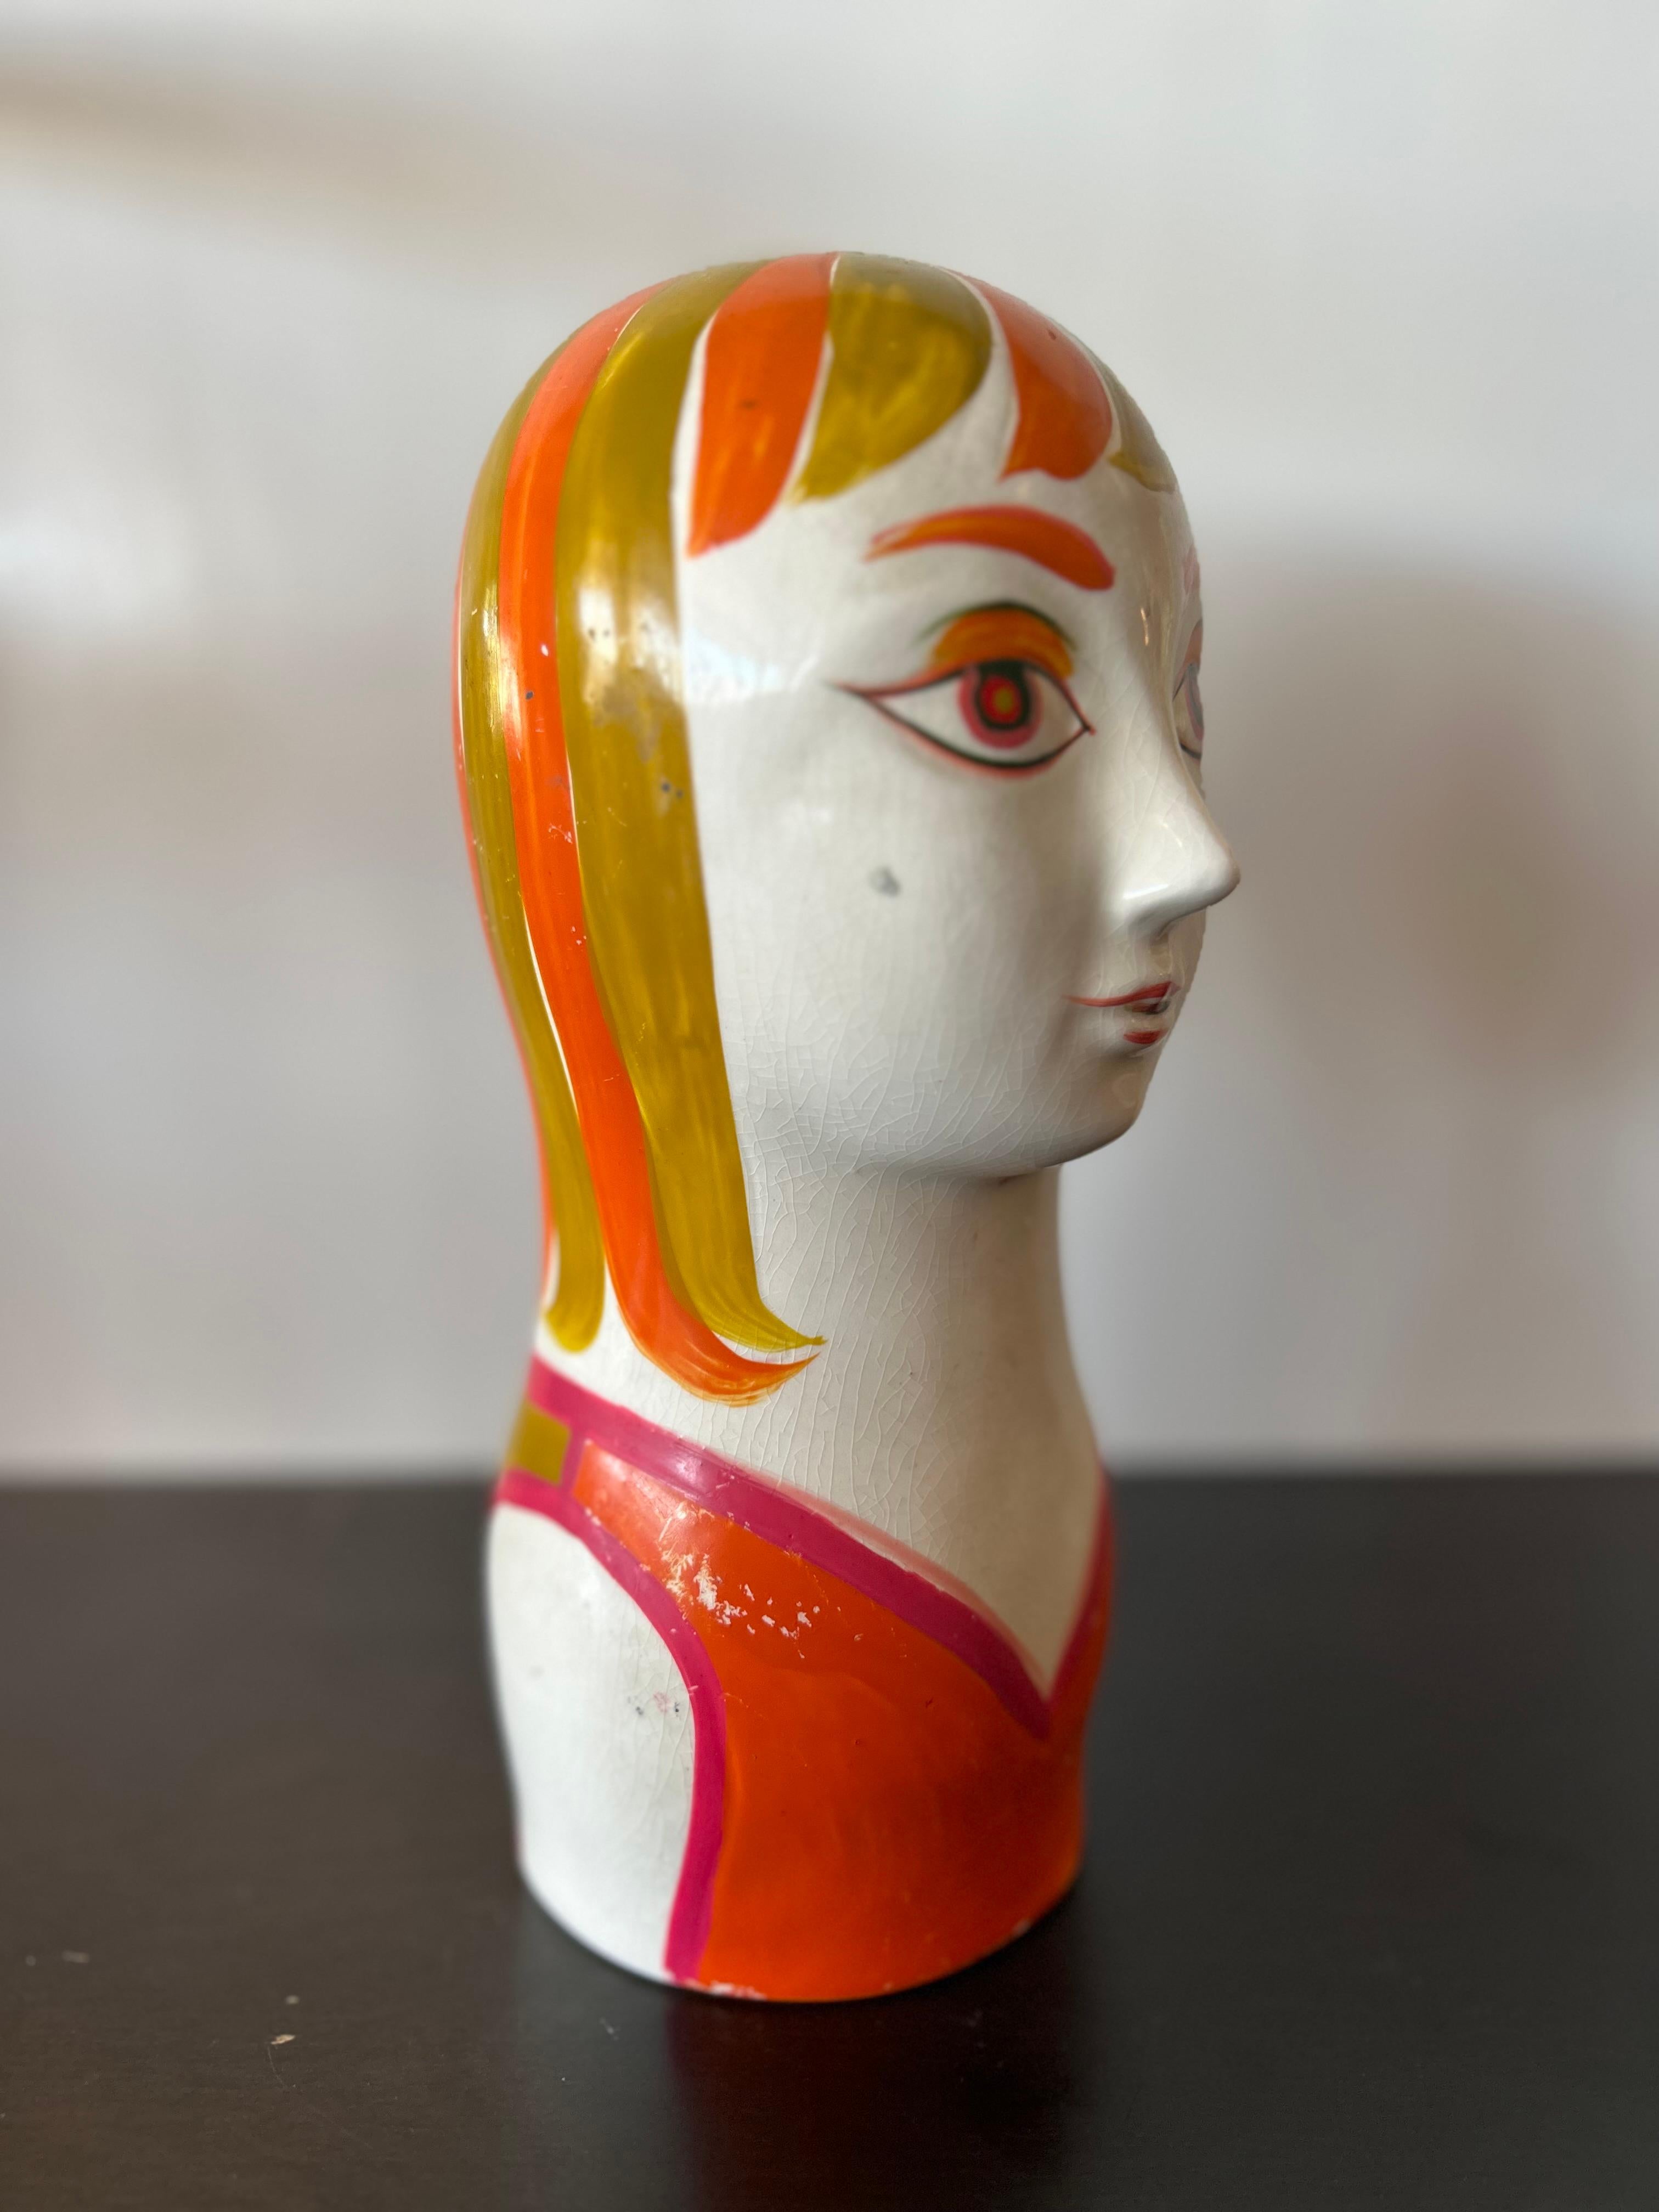 Retro 60's ceramic girl piggy bank or sculpture in the Big Eyes-style. Slight wear to some of the hand painted glazing.